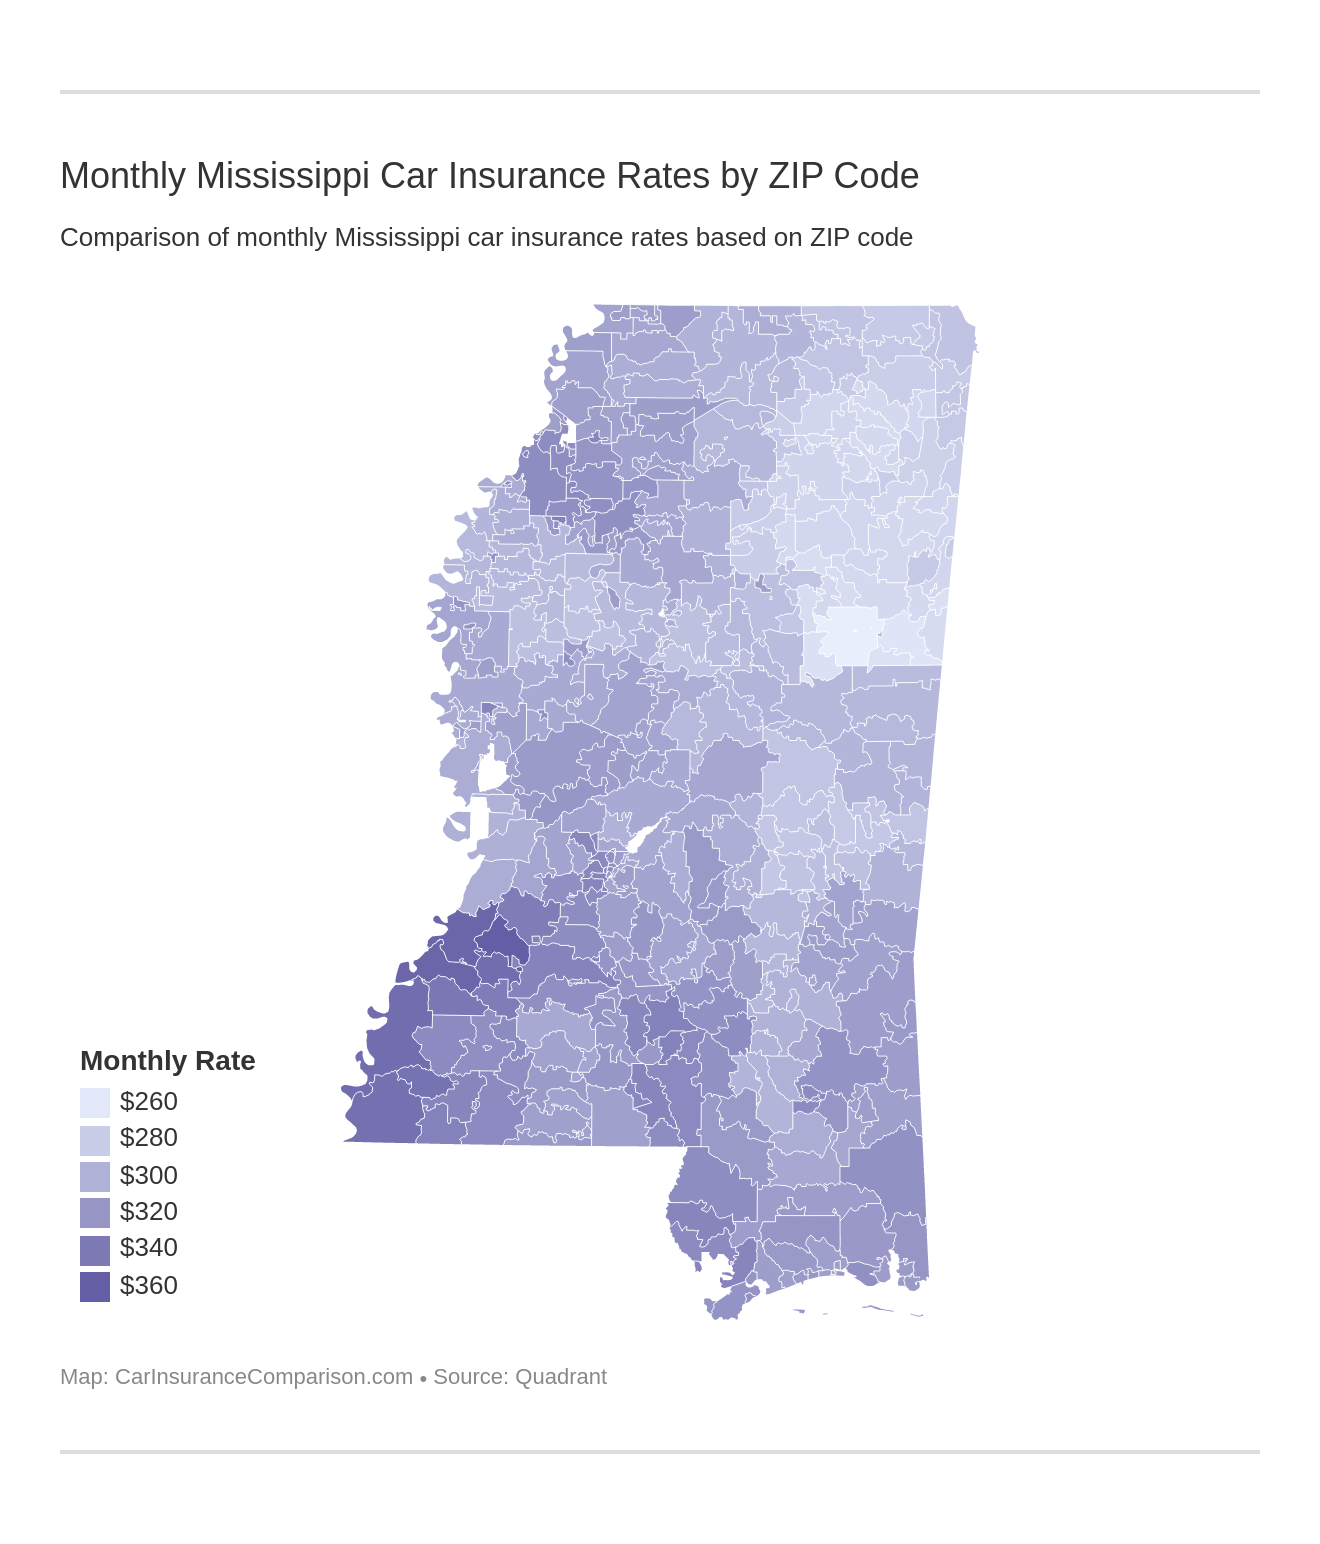 Monthly Mississippi Car Insurance Rates by ZIP Code